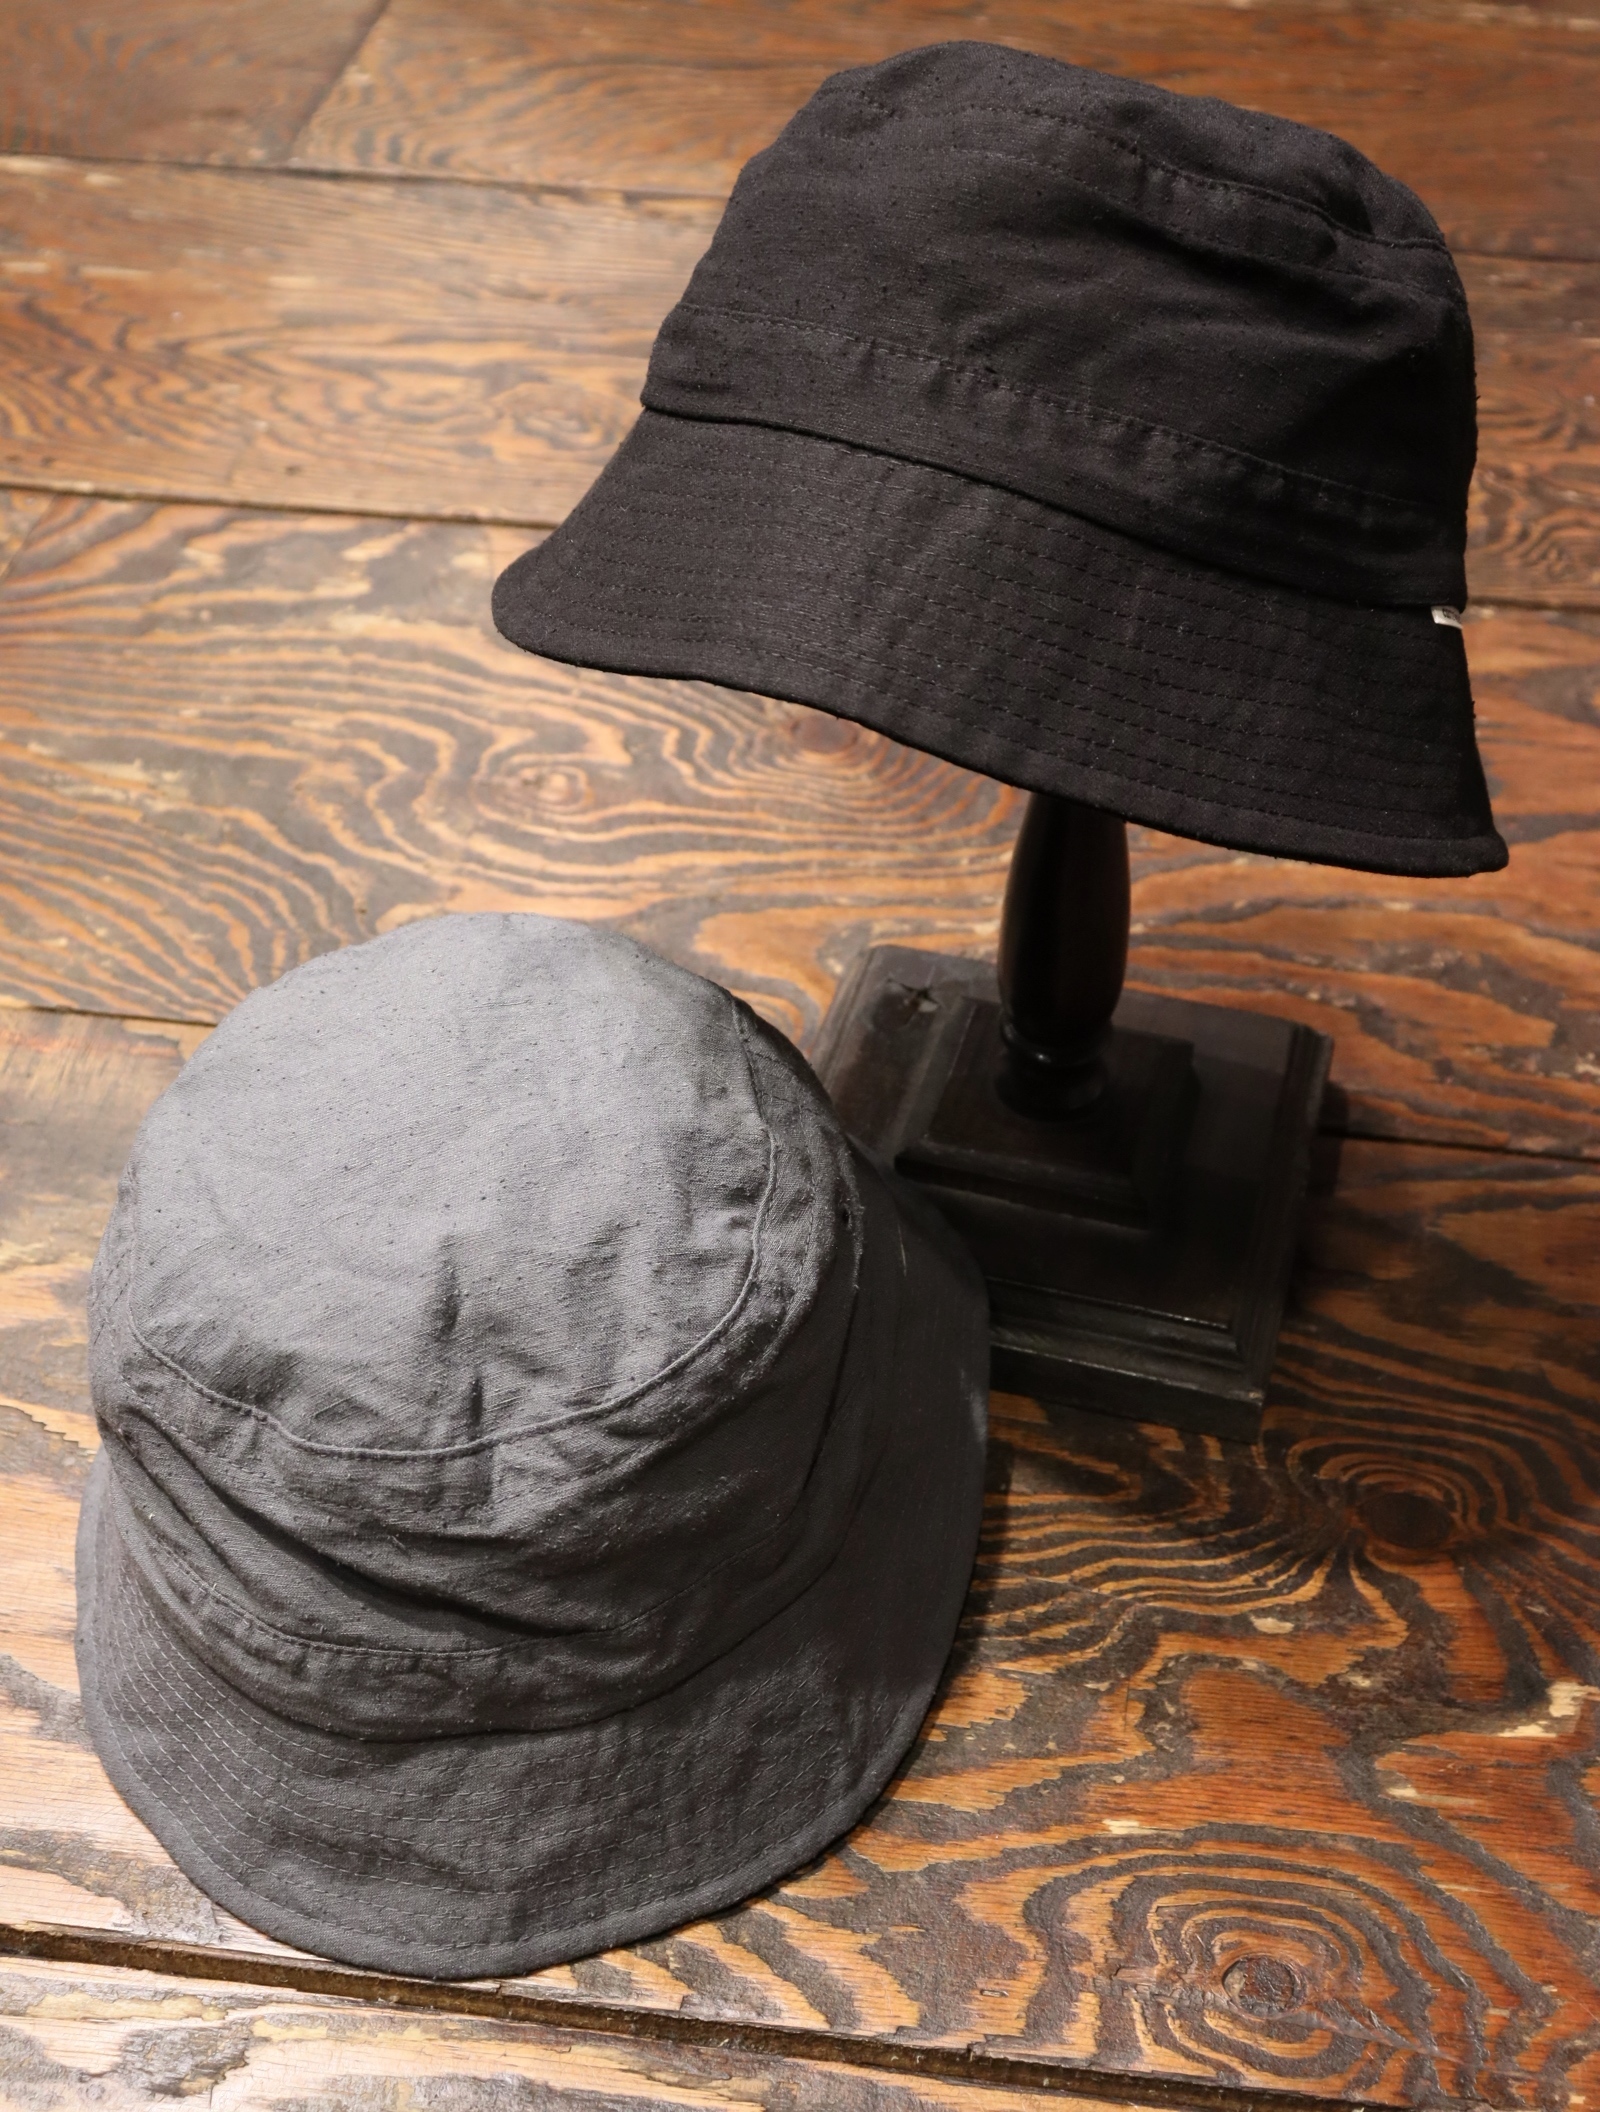 COOTIE　　「 Silknep Back Twill Bucket Hat 」　　バケットハット